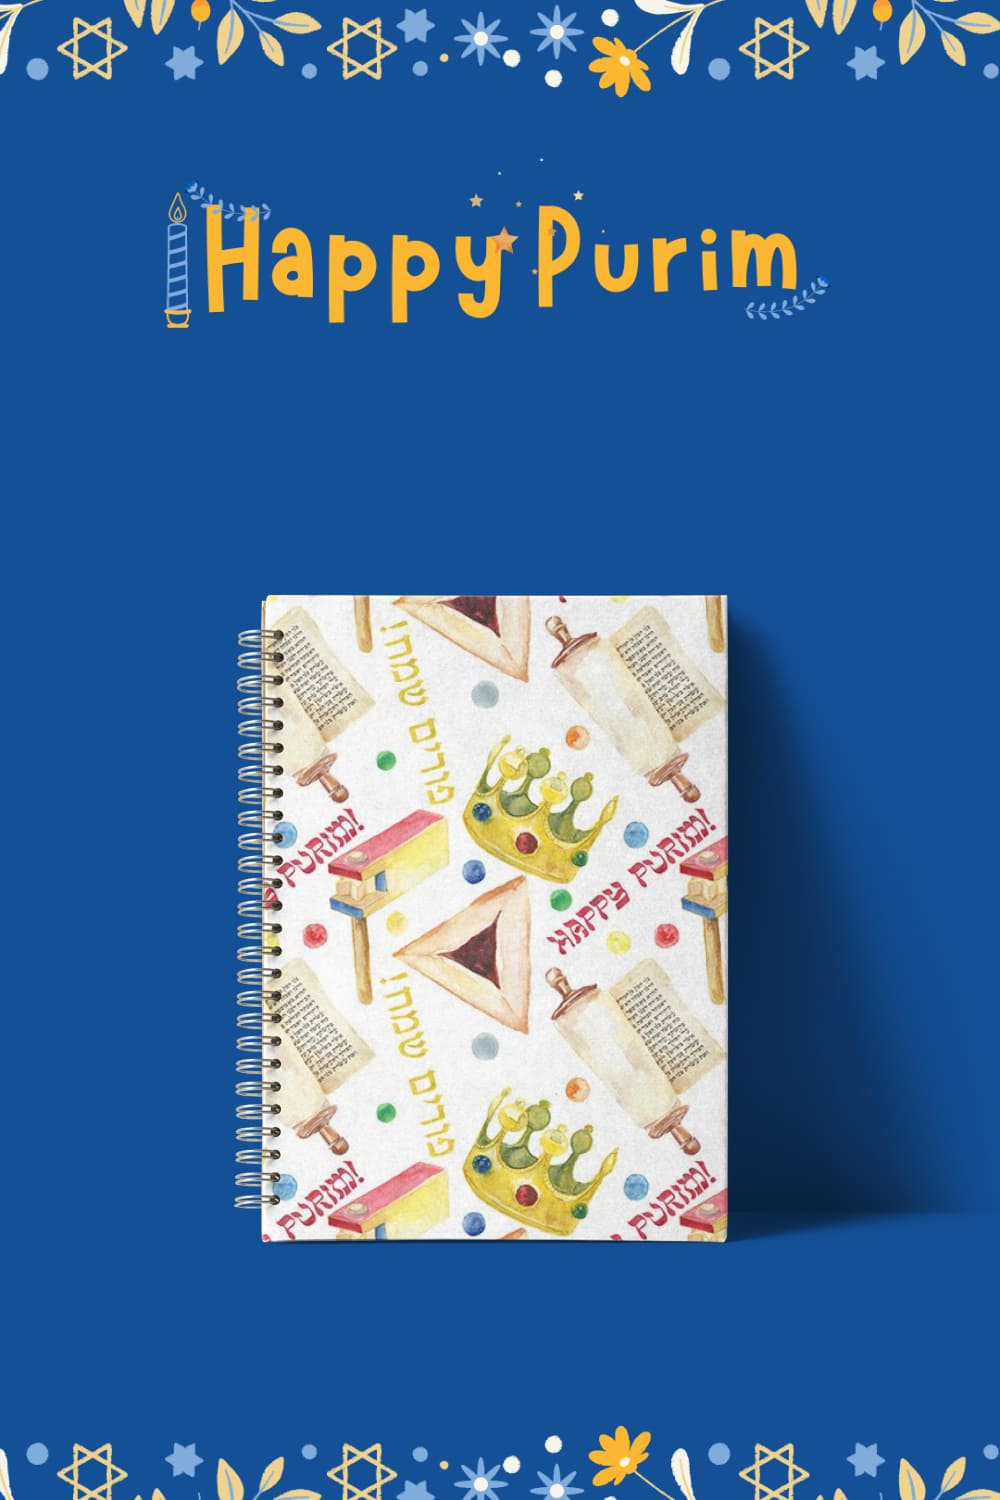 The title of a notebook with illustrations for the day of Purim.